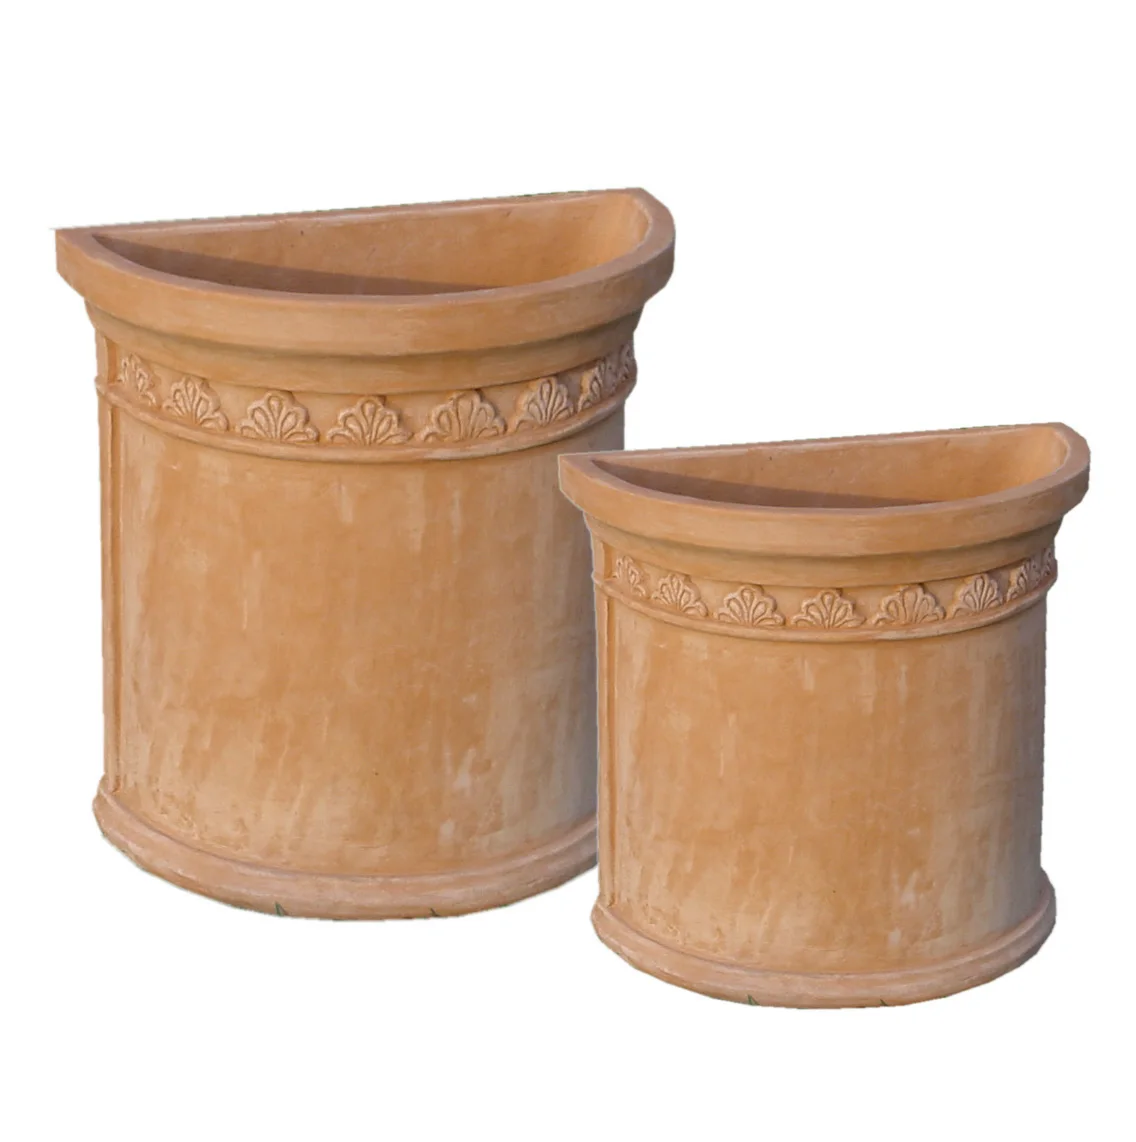 Handmade Rustic Terracotta Flower Pot for Indoor/Outdoor Plants Nursery and Home Use with Drainage Holes for Garden and Floor